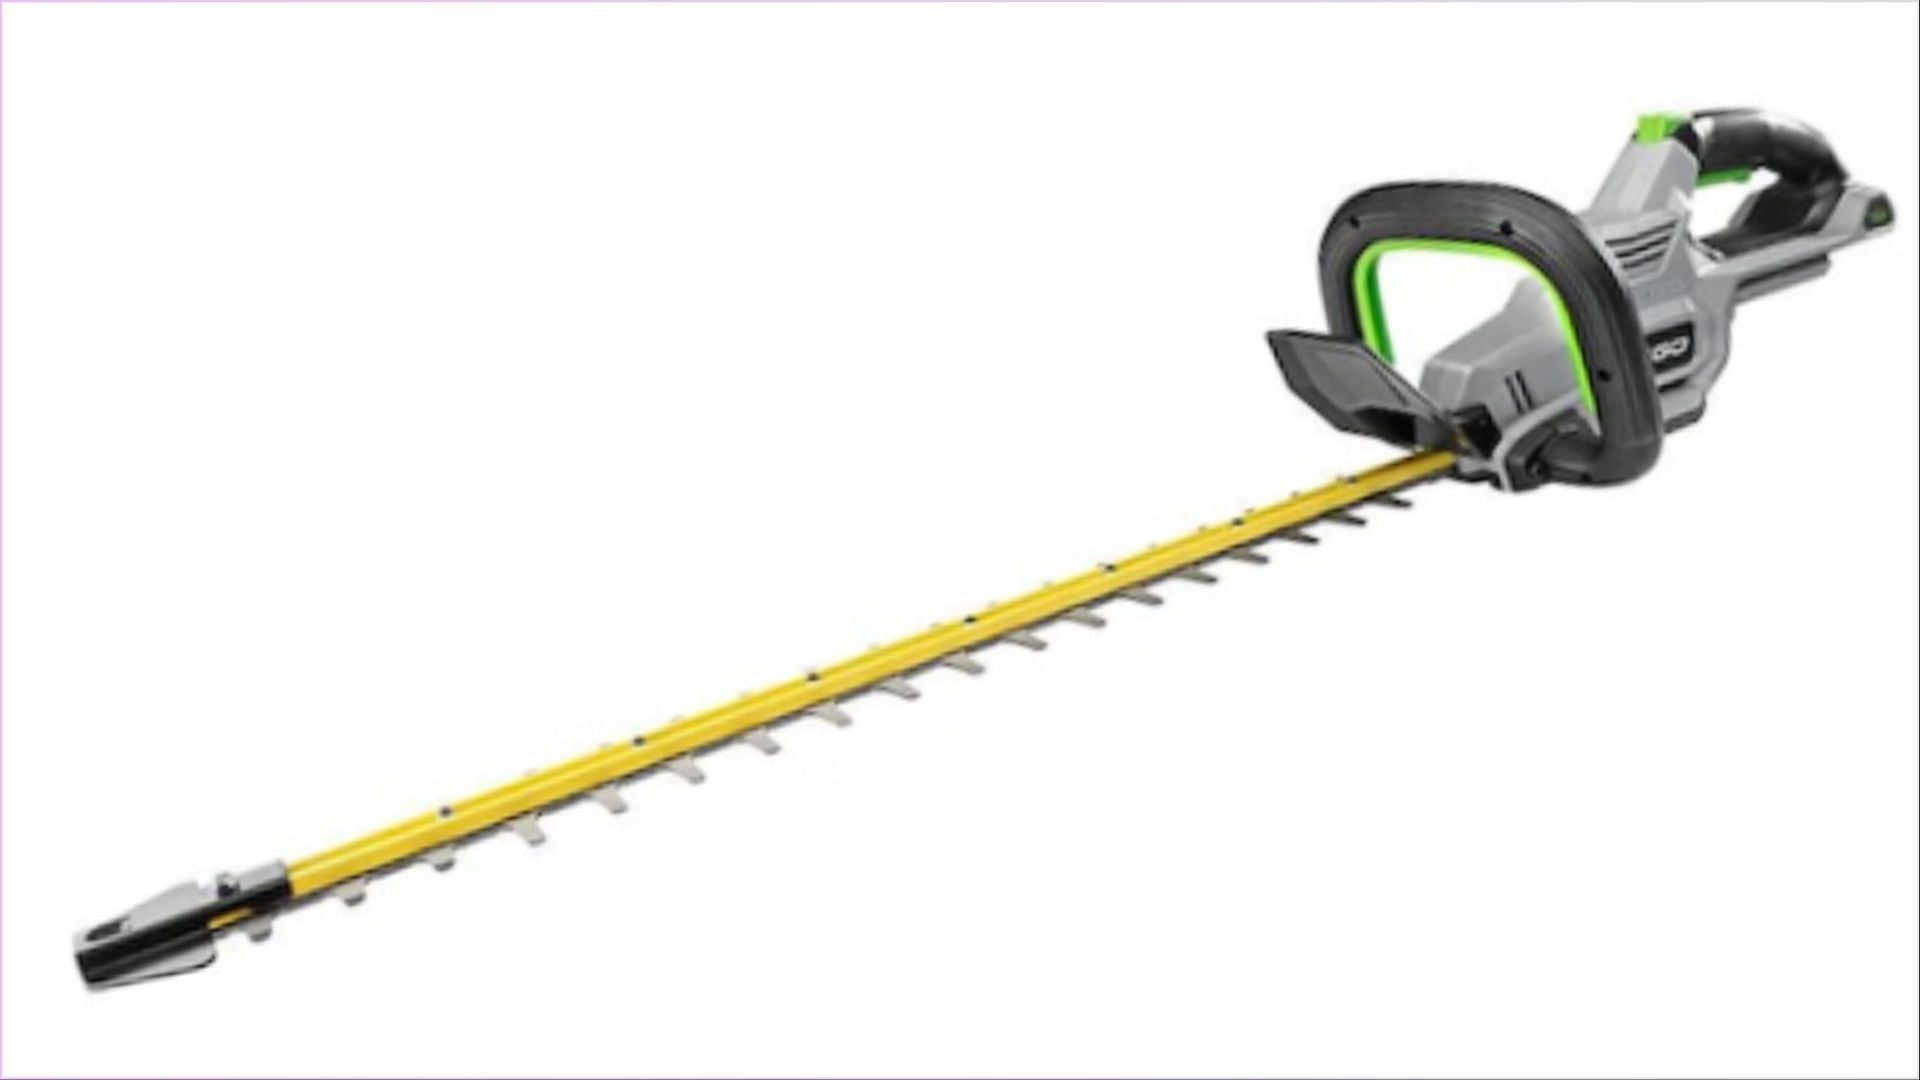 The recalled EGO Power+ Cordless Brushless Hedge Trimmers pose laceration hazards and must not be used until fixed (Image via CPSC)